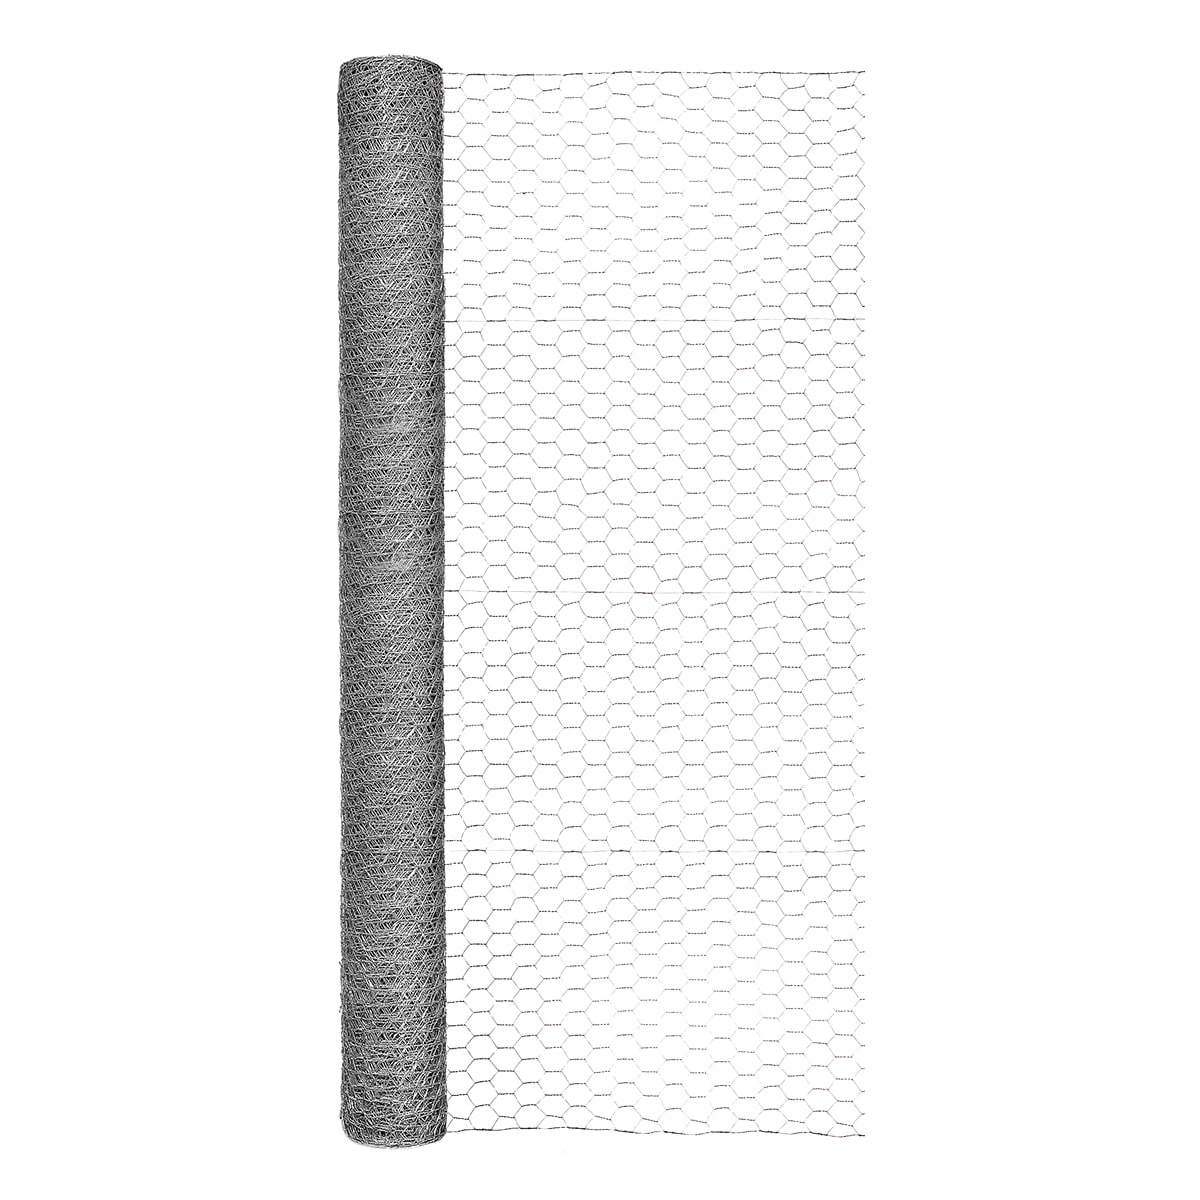 Kahomvis 5 ft. x 100 ft. x 1/2 in. 19-Gauge Galvanized Low Carbon Steel  Hardware Chicken Fence Mesh Roll Chicken Wire Sheng-LKW1-36 - The Home Depot